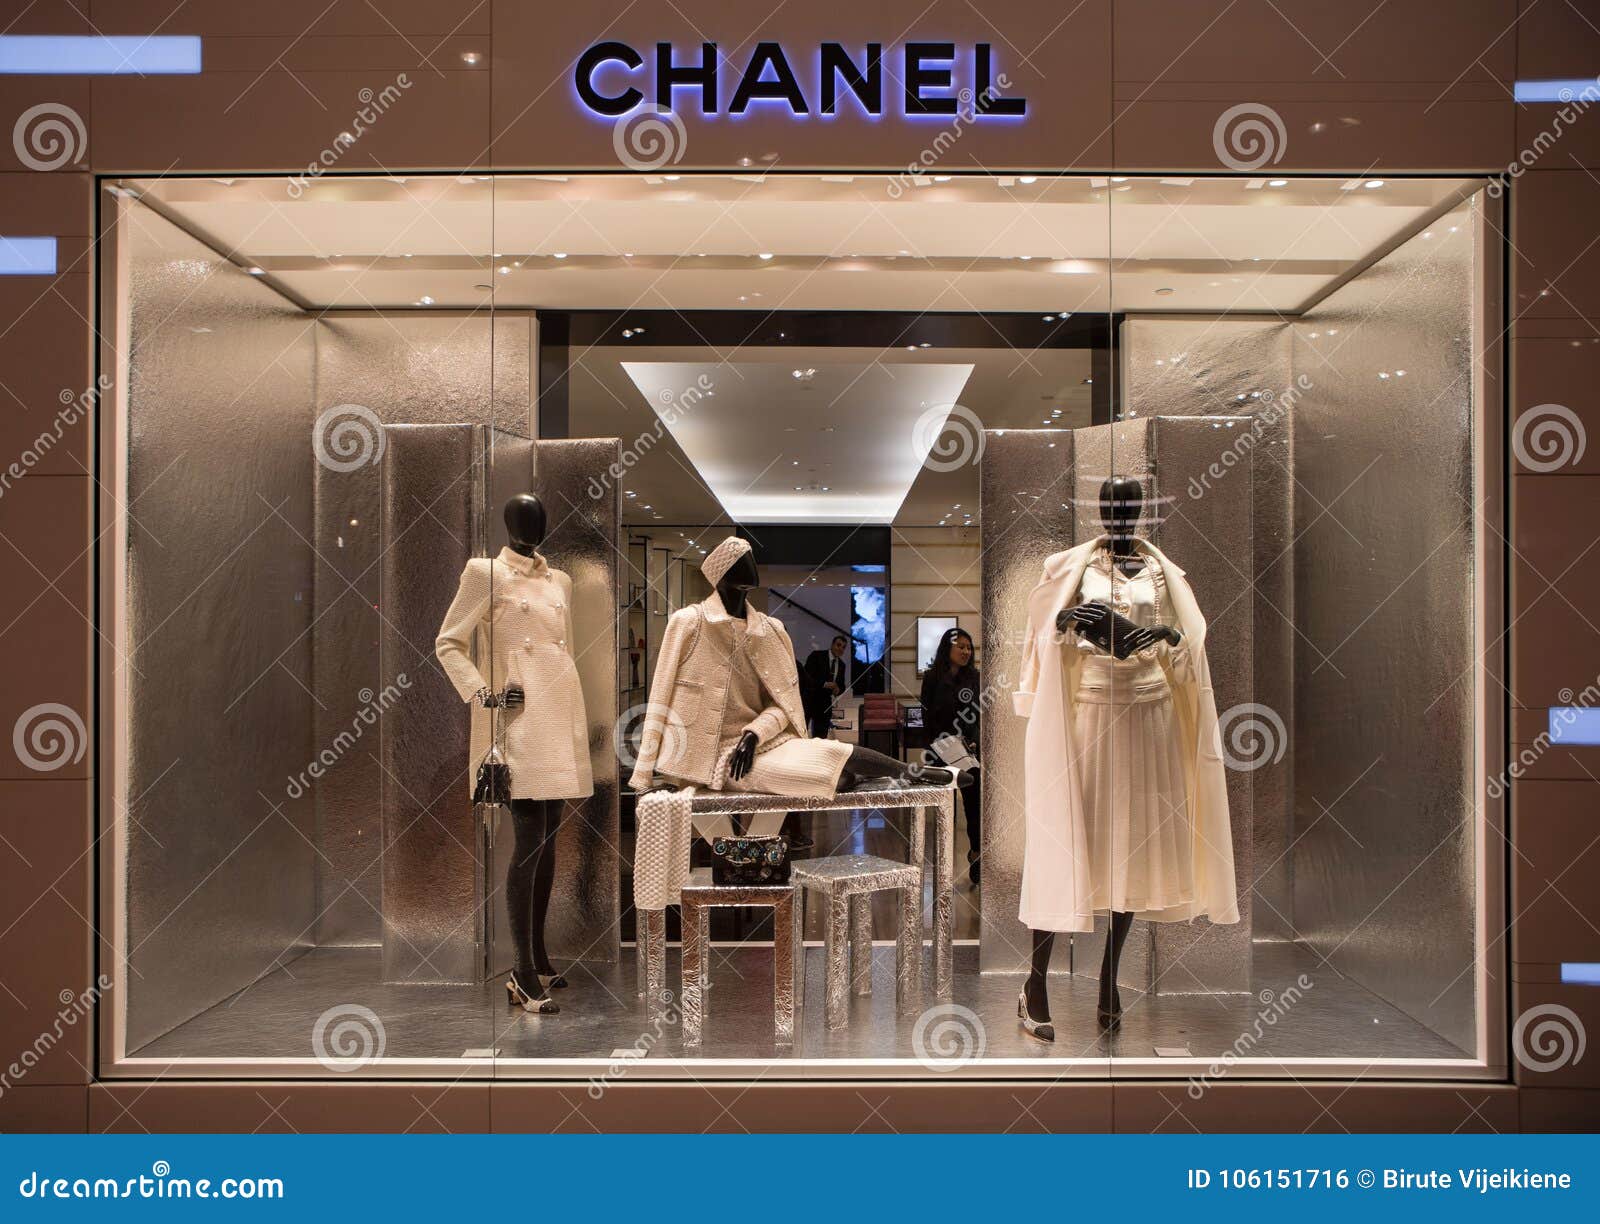 Chanel Shop In Paris, Printemps Shopping Centre Editorial Photo - Image of brand, france: 106151716